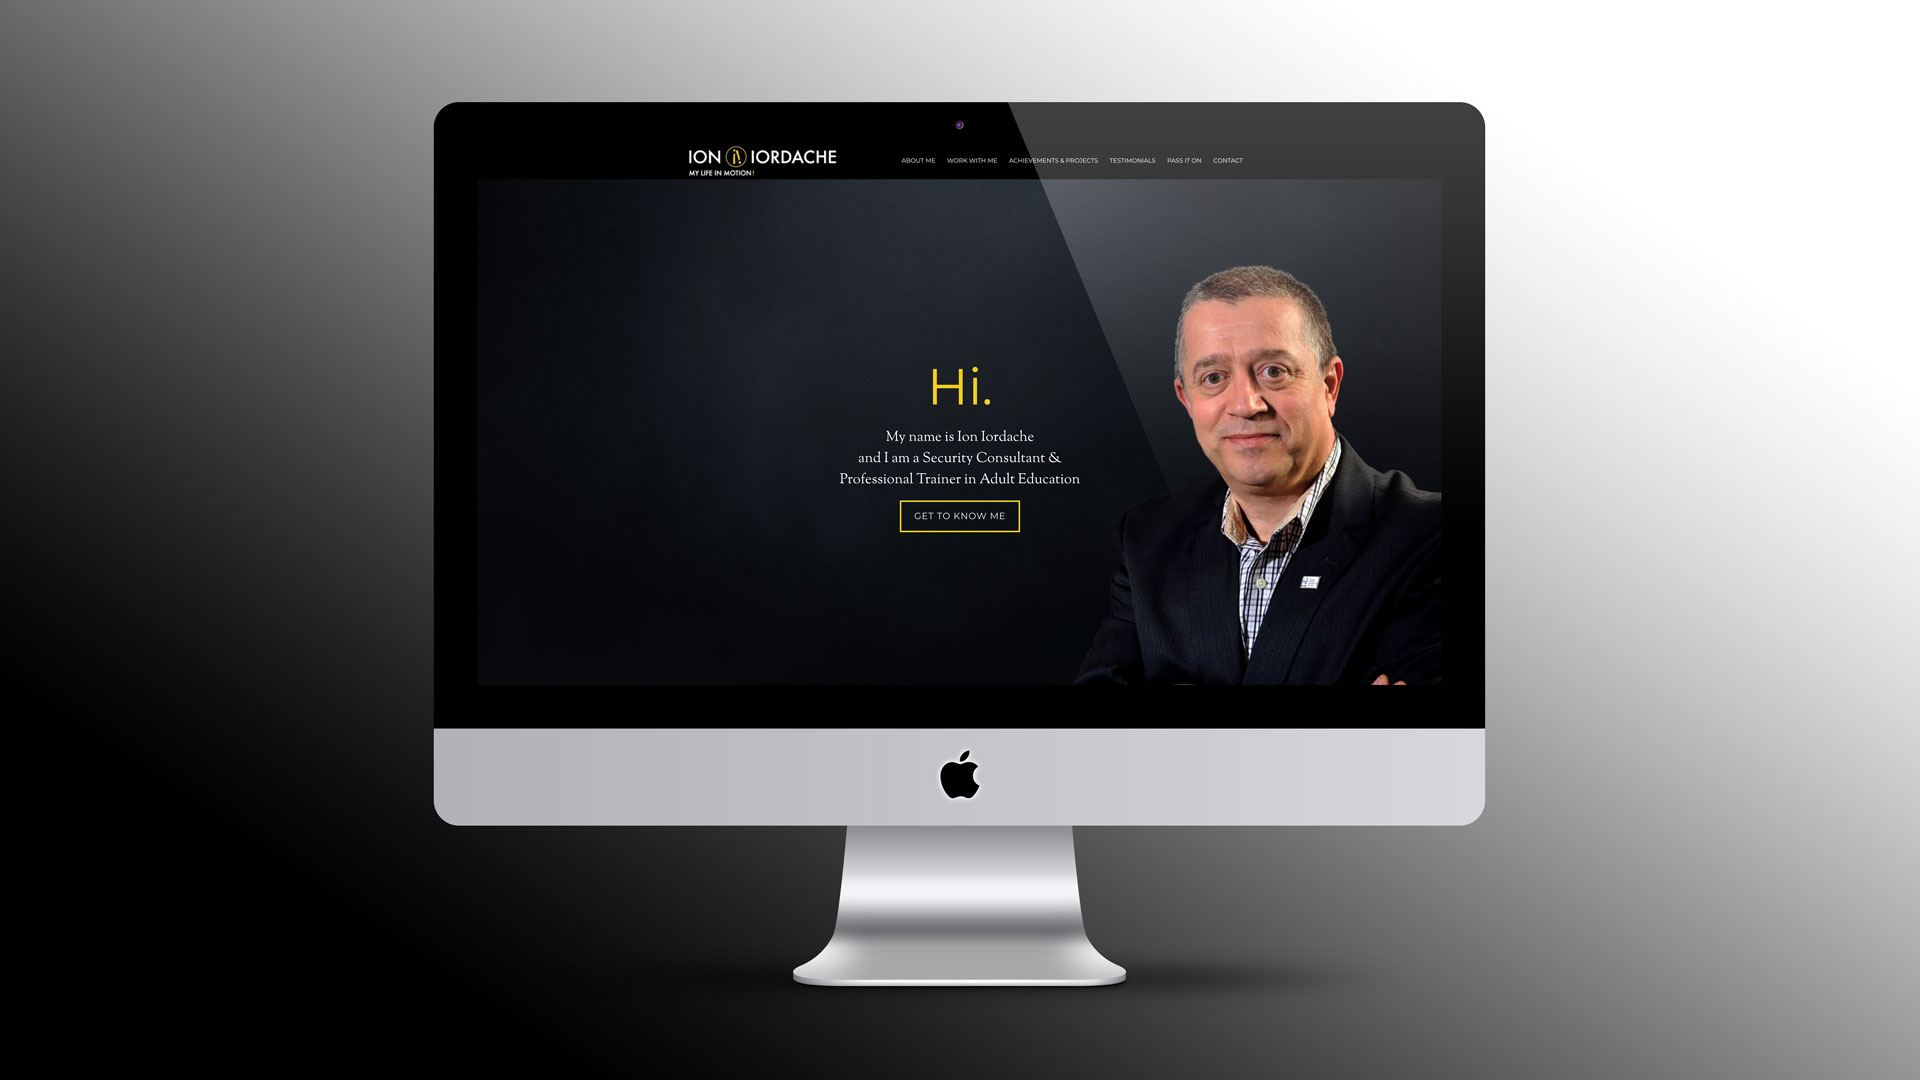 This PixelUp illustration showcases an iMac set against a dark grey linear gradient backdrop. On the screen, Ion Iordache's website homepage is displayed, featuring his portrait photo against a black background. Gold headlines and messages stand out against the dark backdrop. Ion Iordache's brand identity is among PixelUp's portfolio.